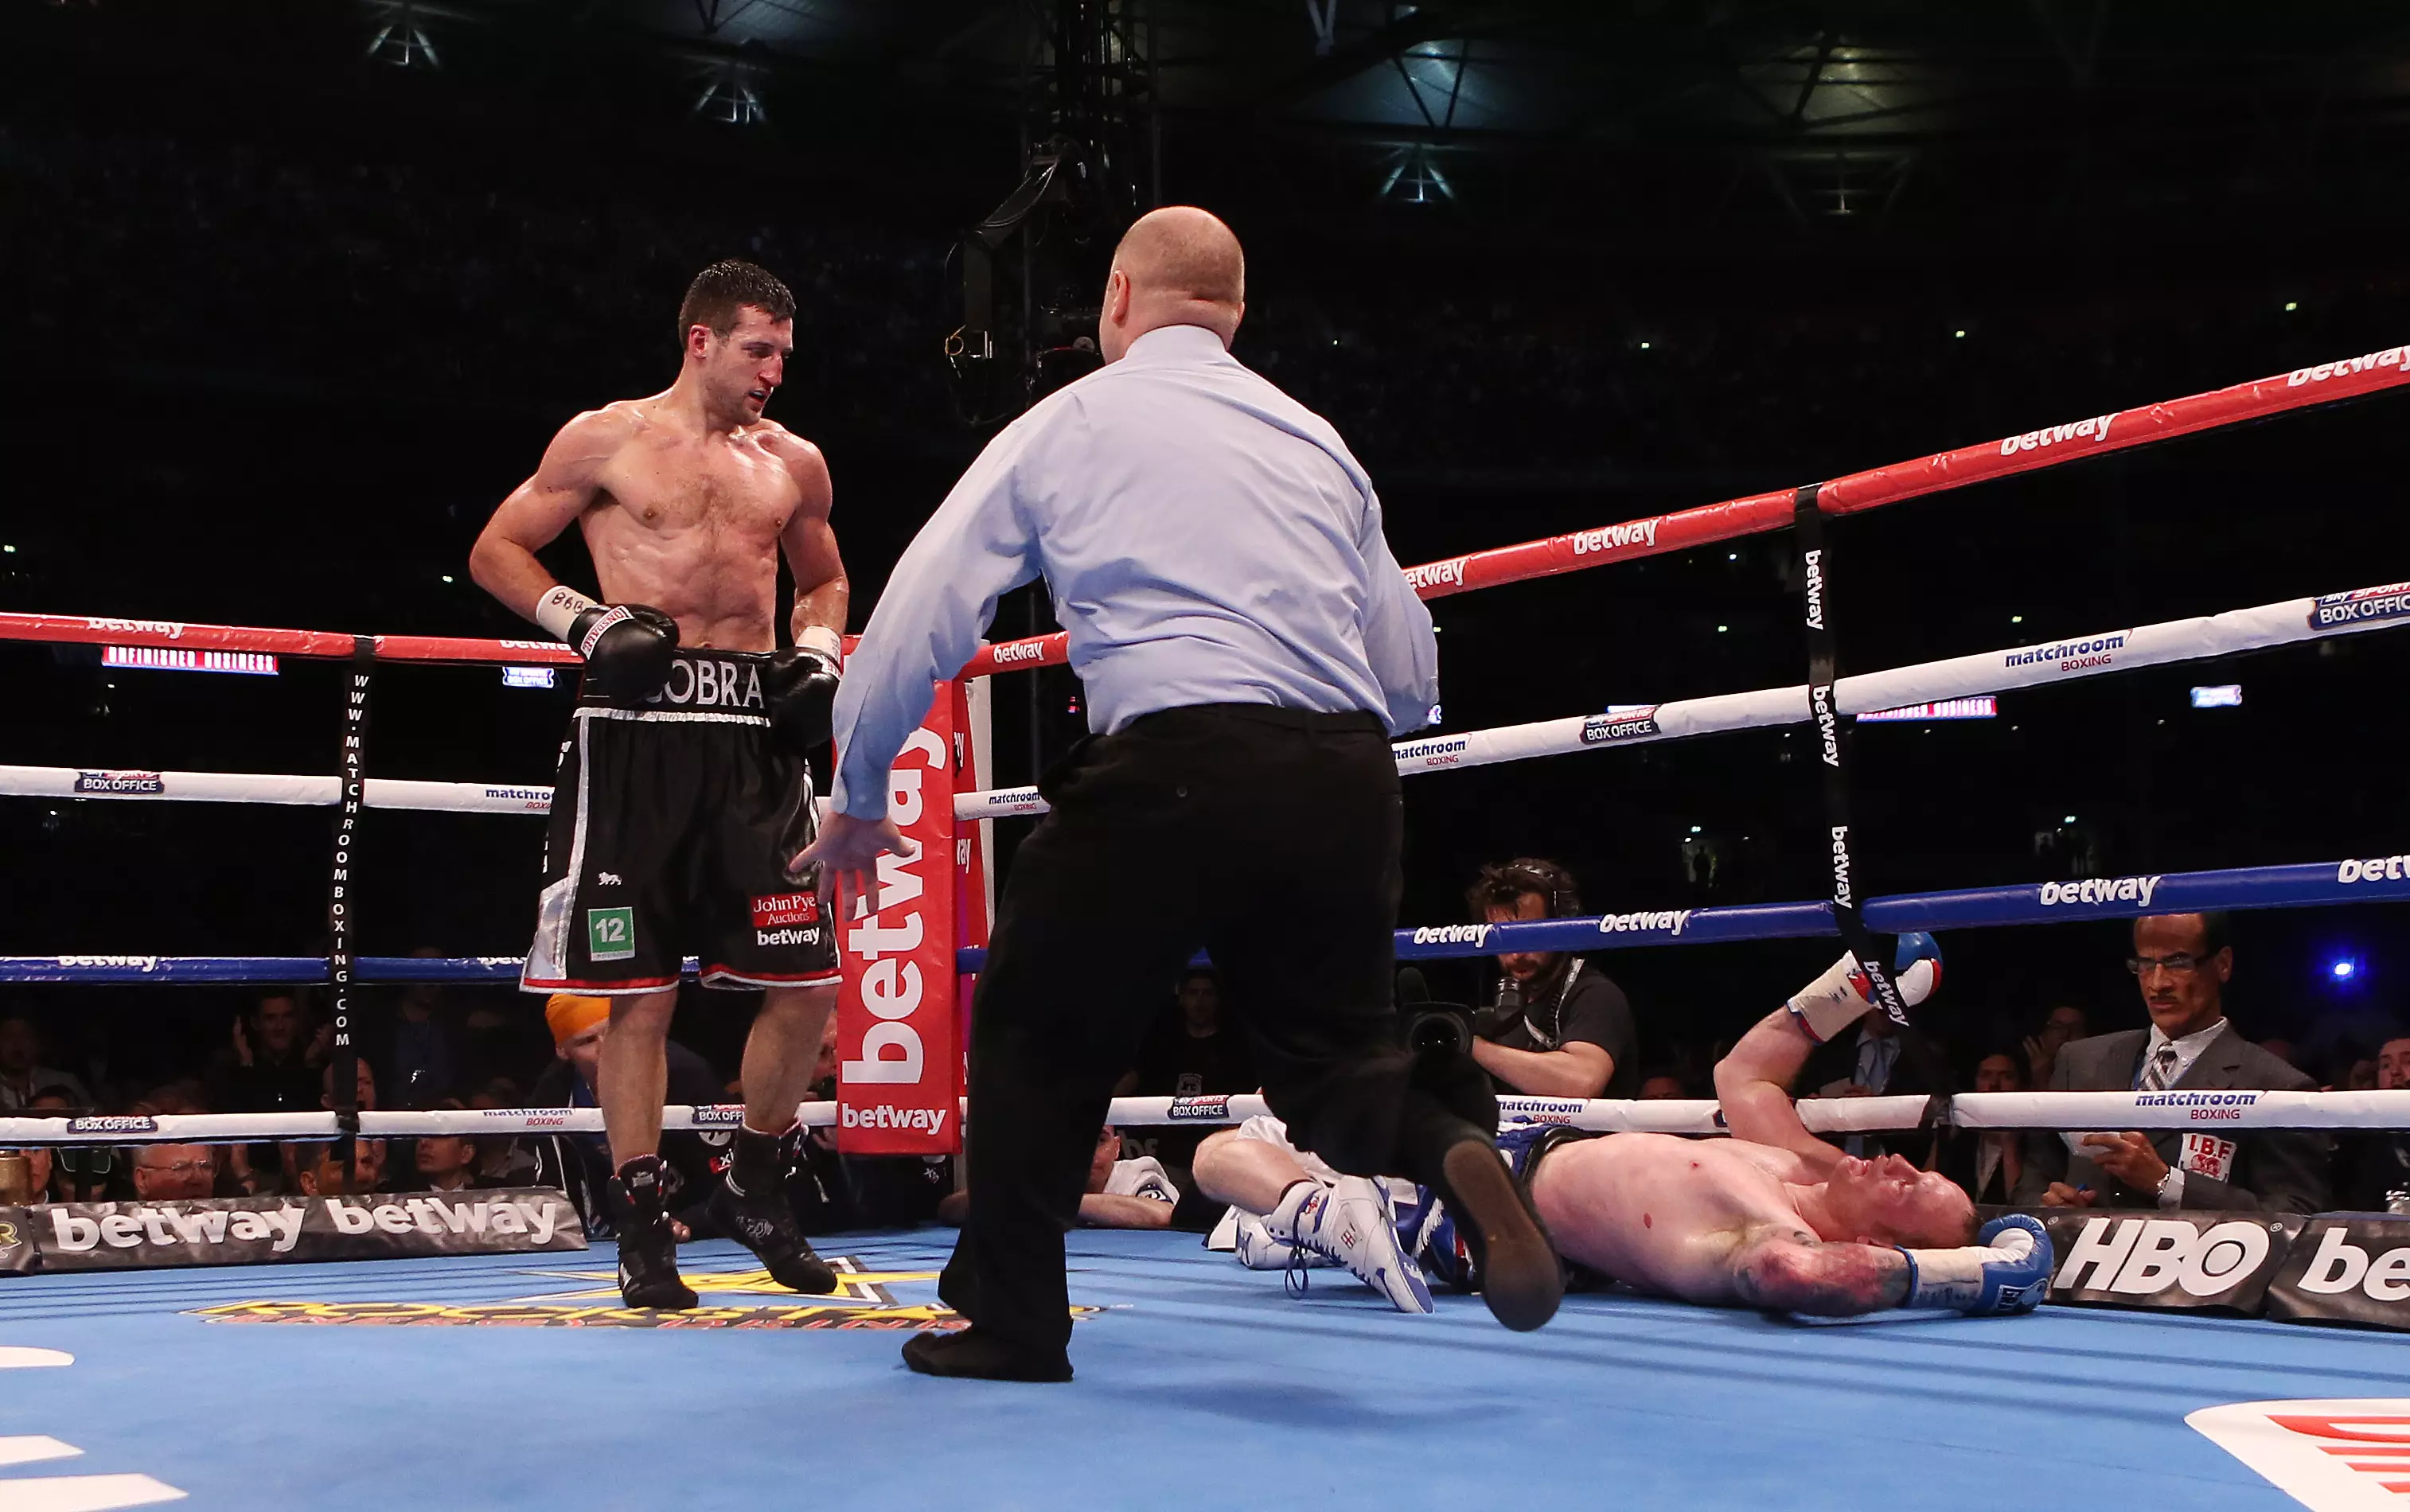 Froch ended his career with the huge knockout of Groves. Image: PA Images